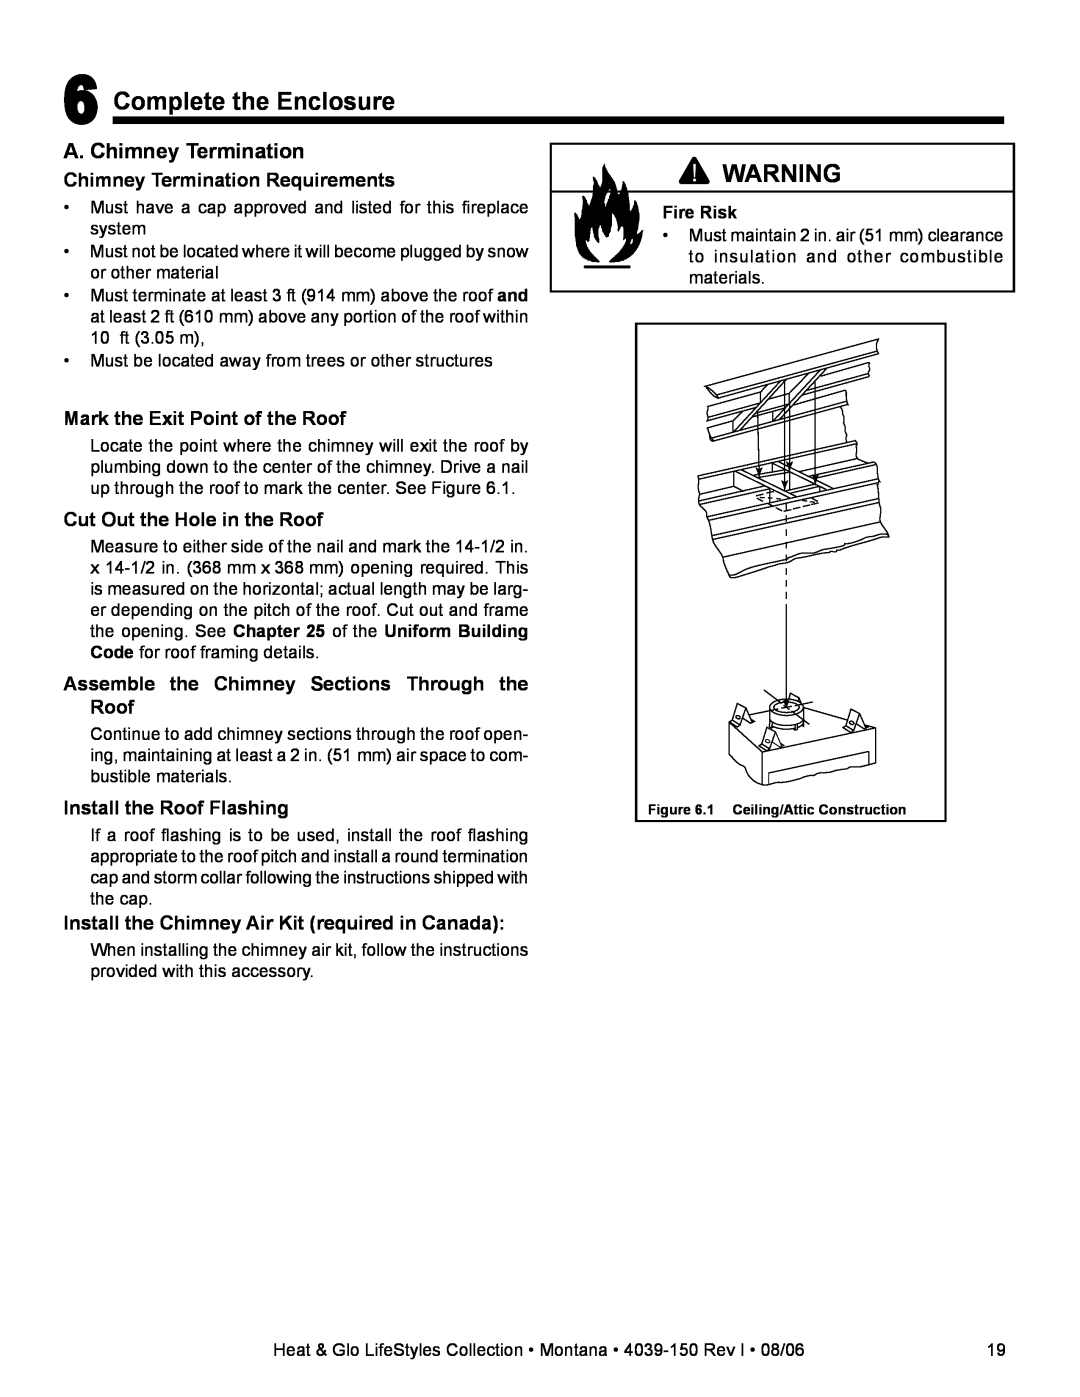 Heat & Glo LifeStyle Montana-36, Montana-42 owner manual Complete the Enclosure, A. Chimney Termination, Fire Risk 